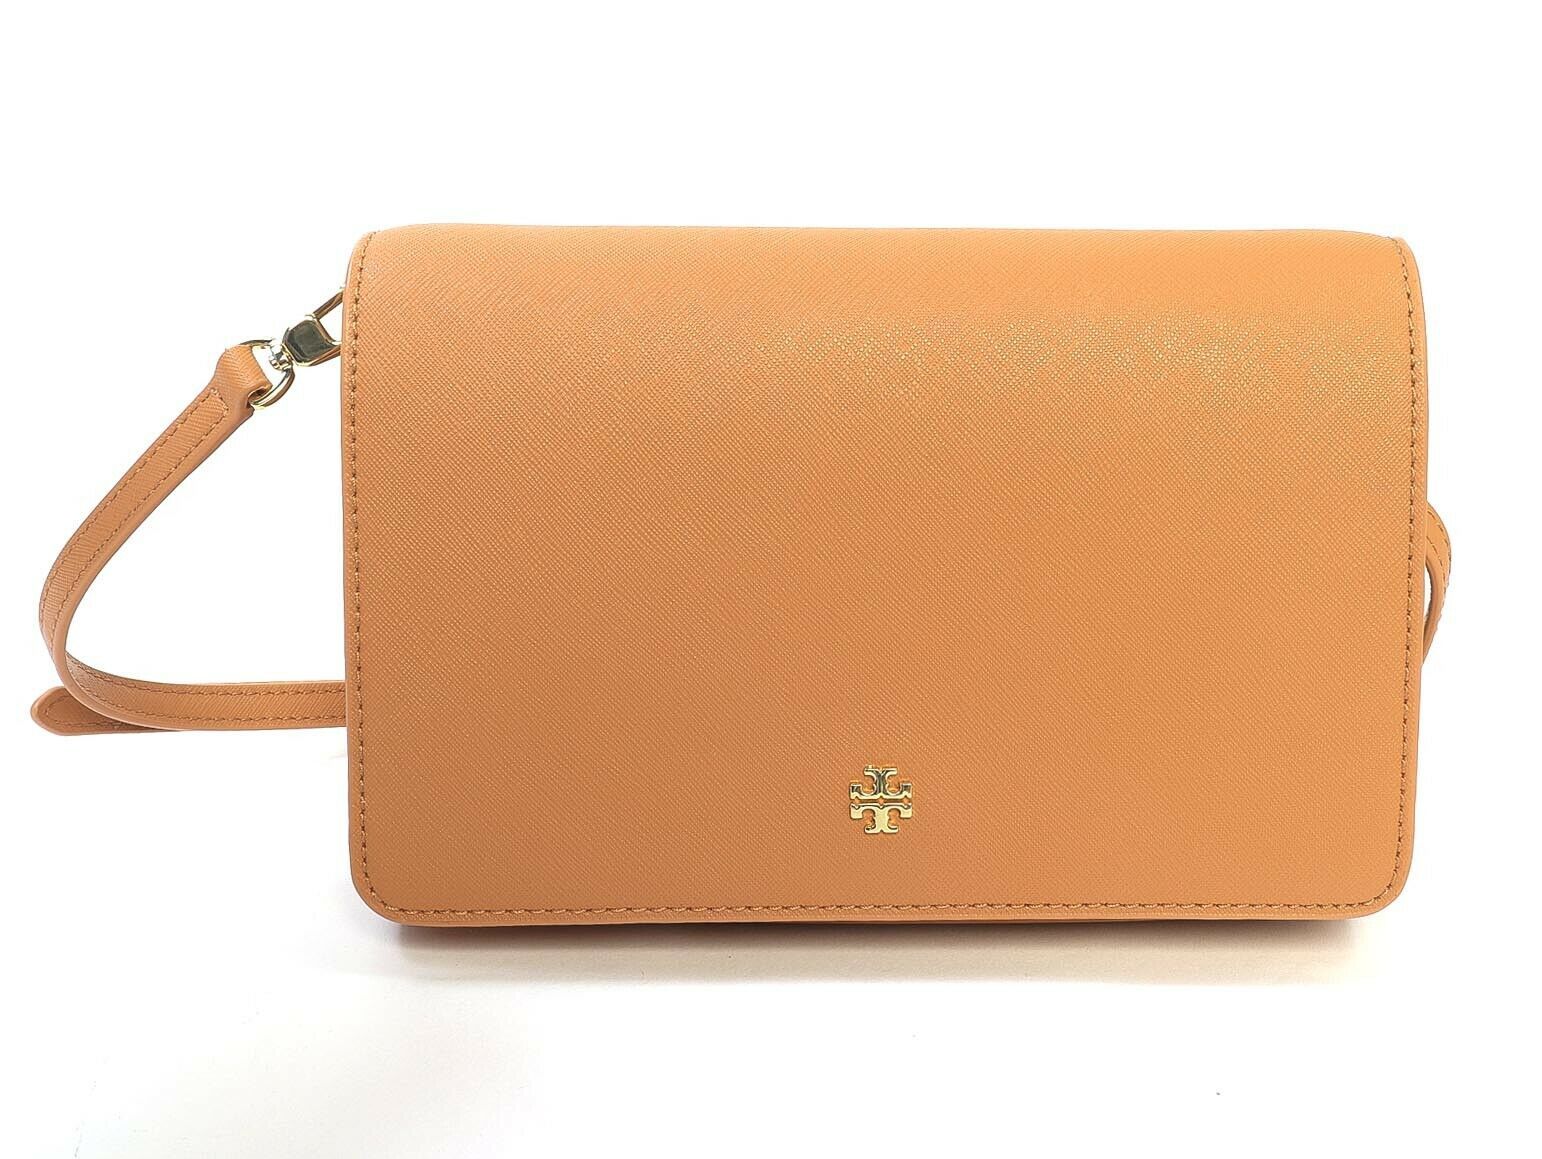 Tory Burch French Gray Emerson Leather Crossbody Bag, Best Price and  Reviews